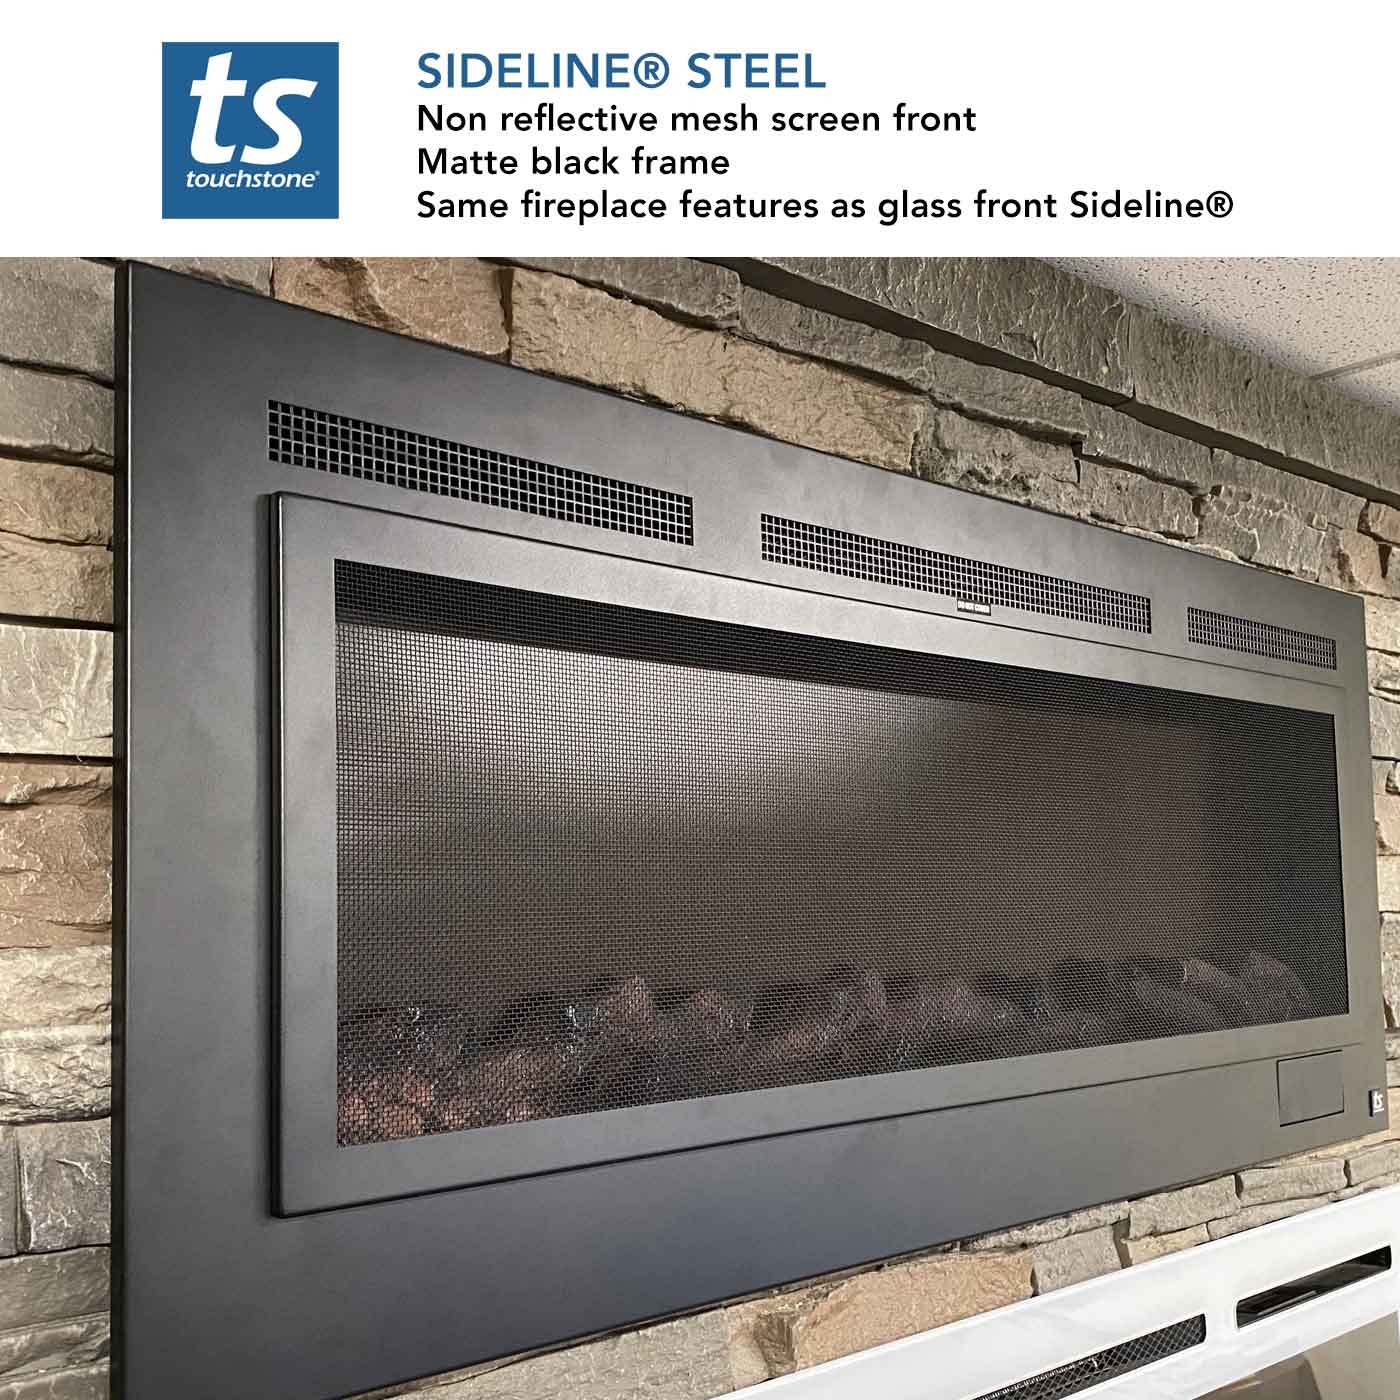 Sideline Steel electric fireplace with matte black frame and non reflective mesh screen front